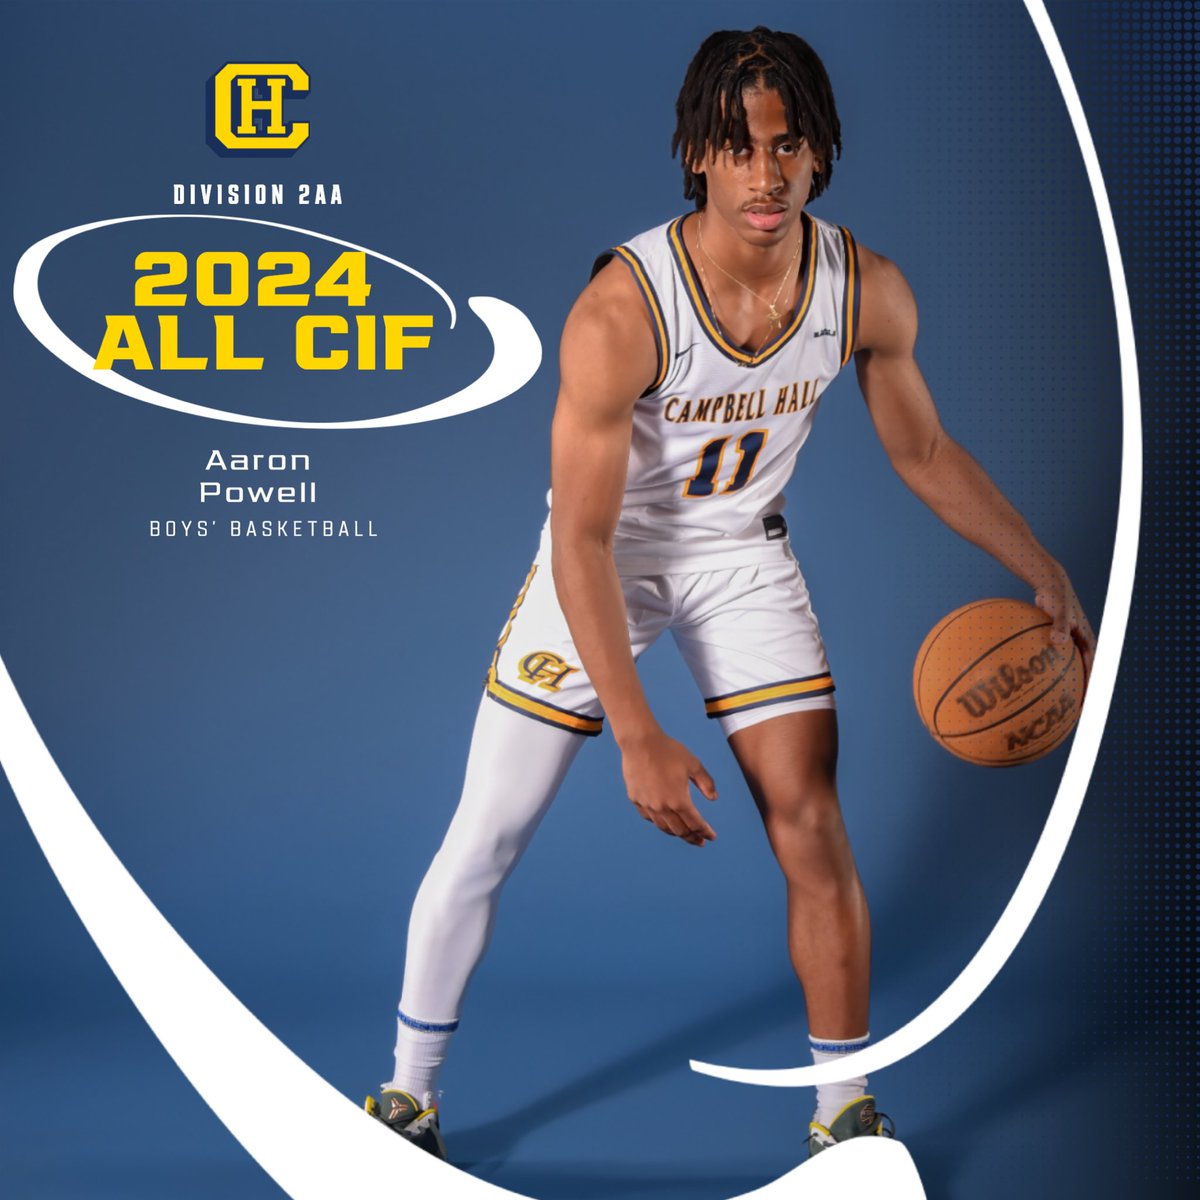 Congratulations to Aaron Powell ‘24 on earning All @CIFSS honors! 👏🎉 #GoCHVikings #TheHall @gochhoops